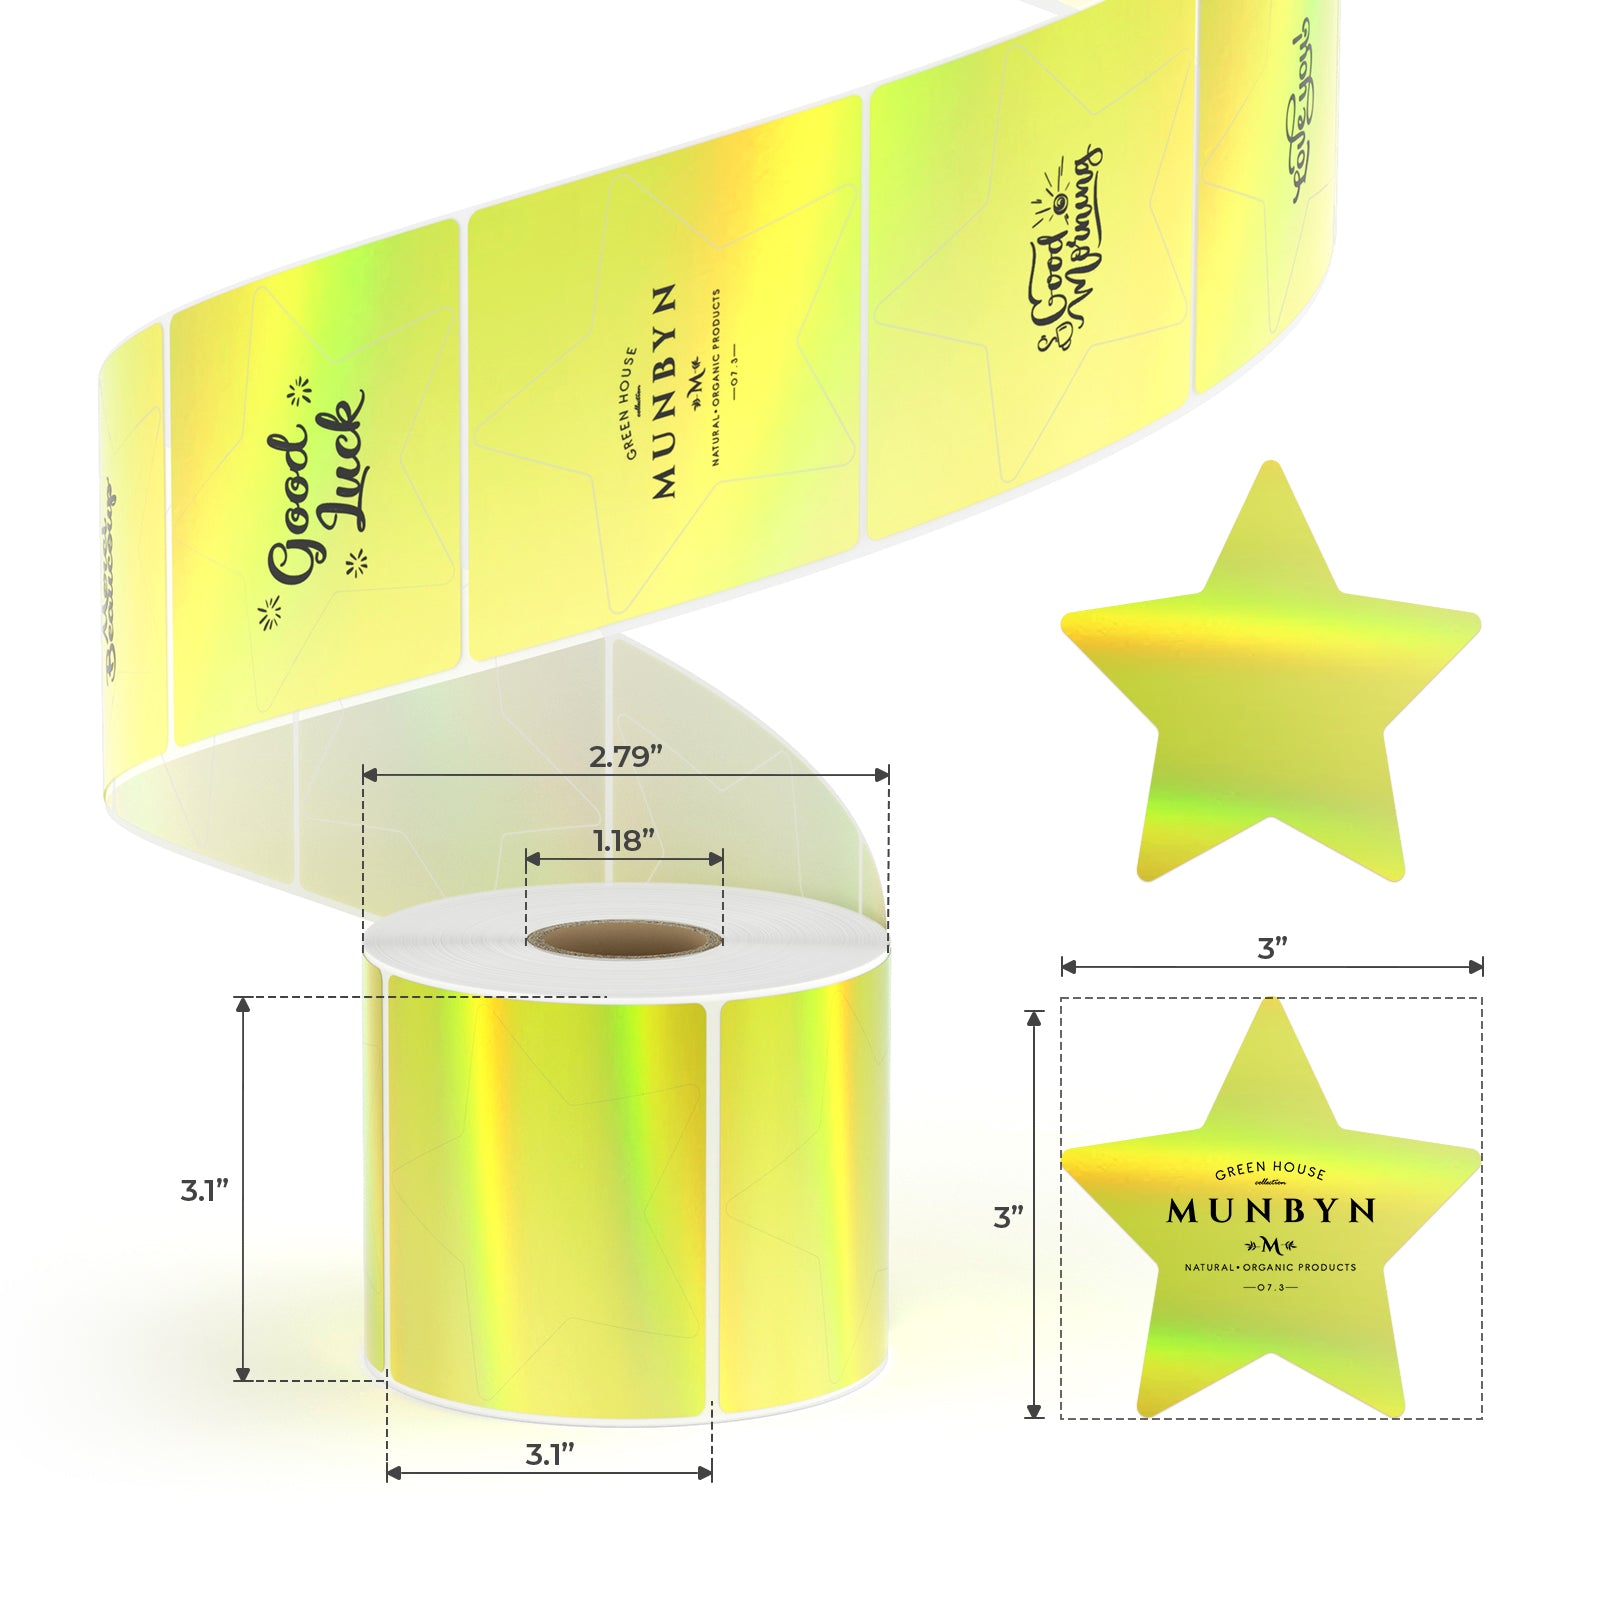 MUNBYN's versatile gold holographic star-shaped thermal labels measure 3" x 3", with 250 labels per roll.